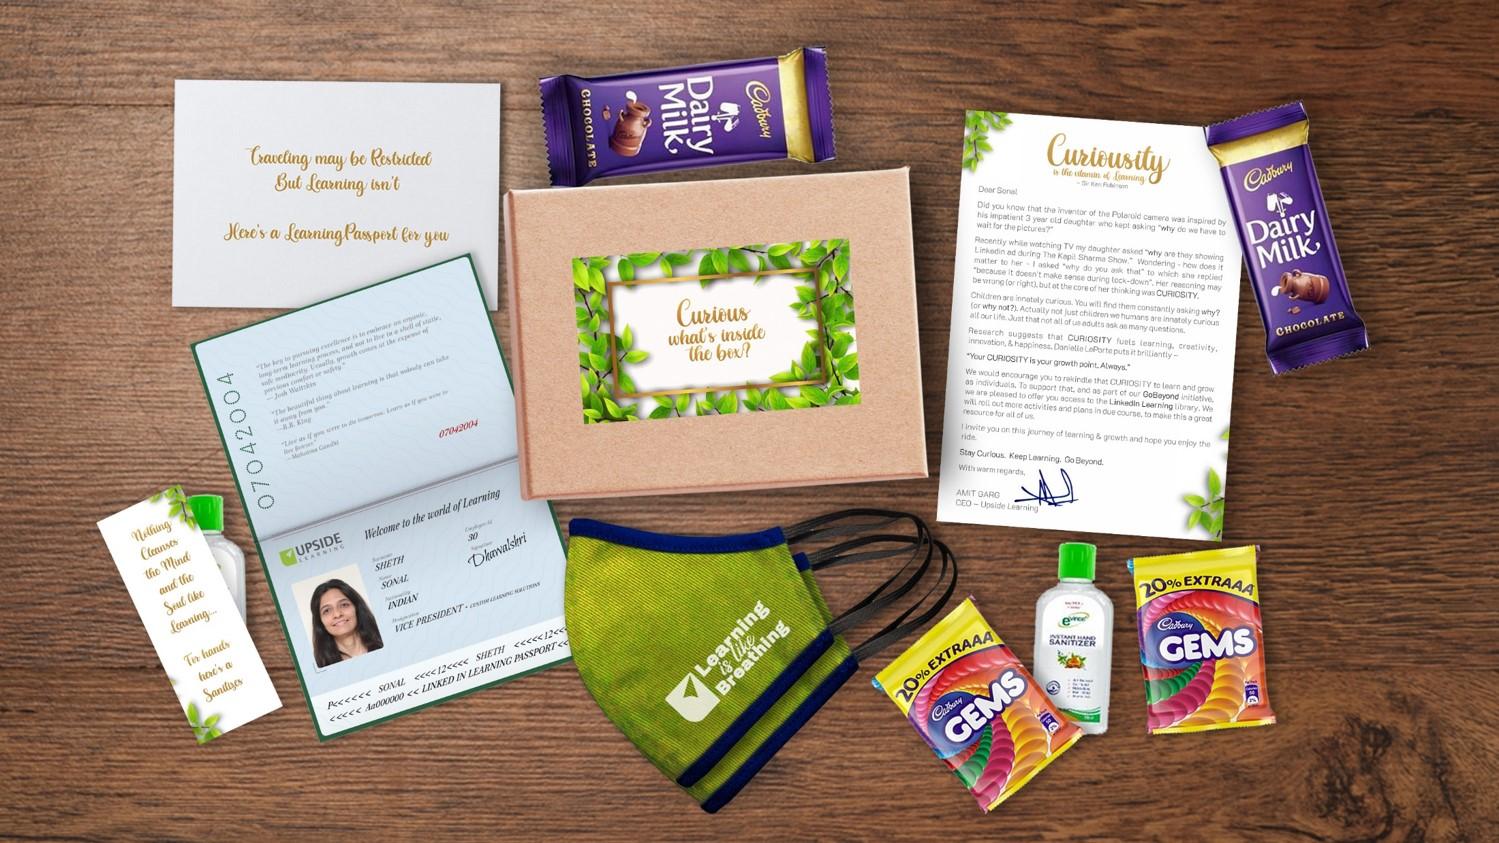 Collection of Curiosity Boosters: Letter on the Importance of Curiosity, LinkedIn Learning Passport, Sanitizers, Masks with 'Learning is like Breathing' Text, and Delicious Chocolates